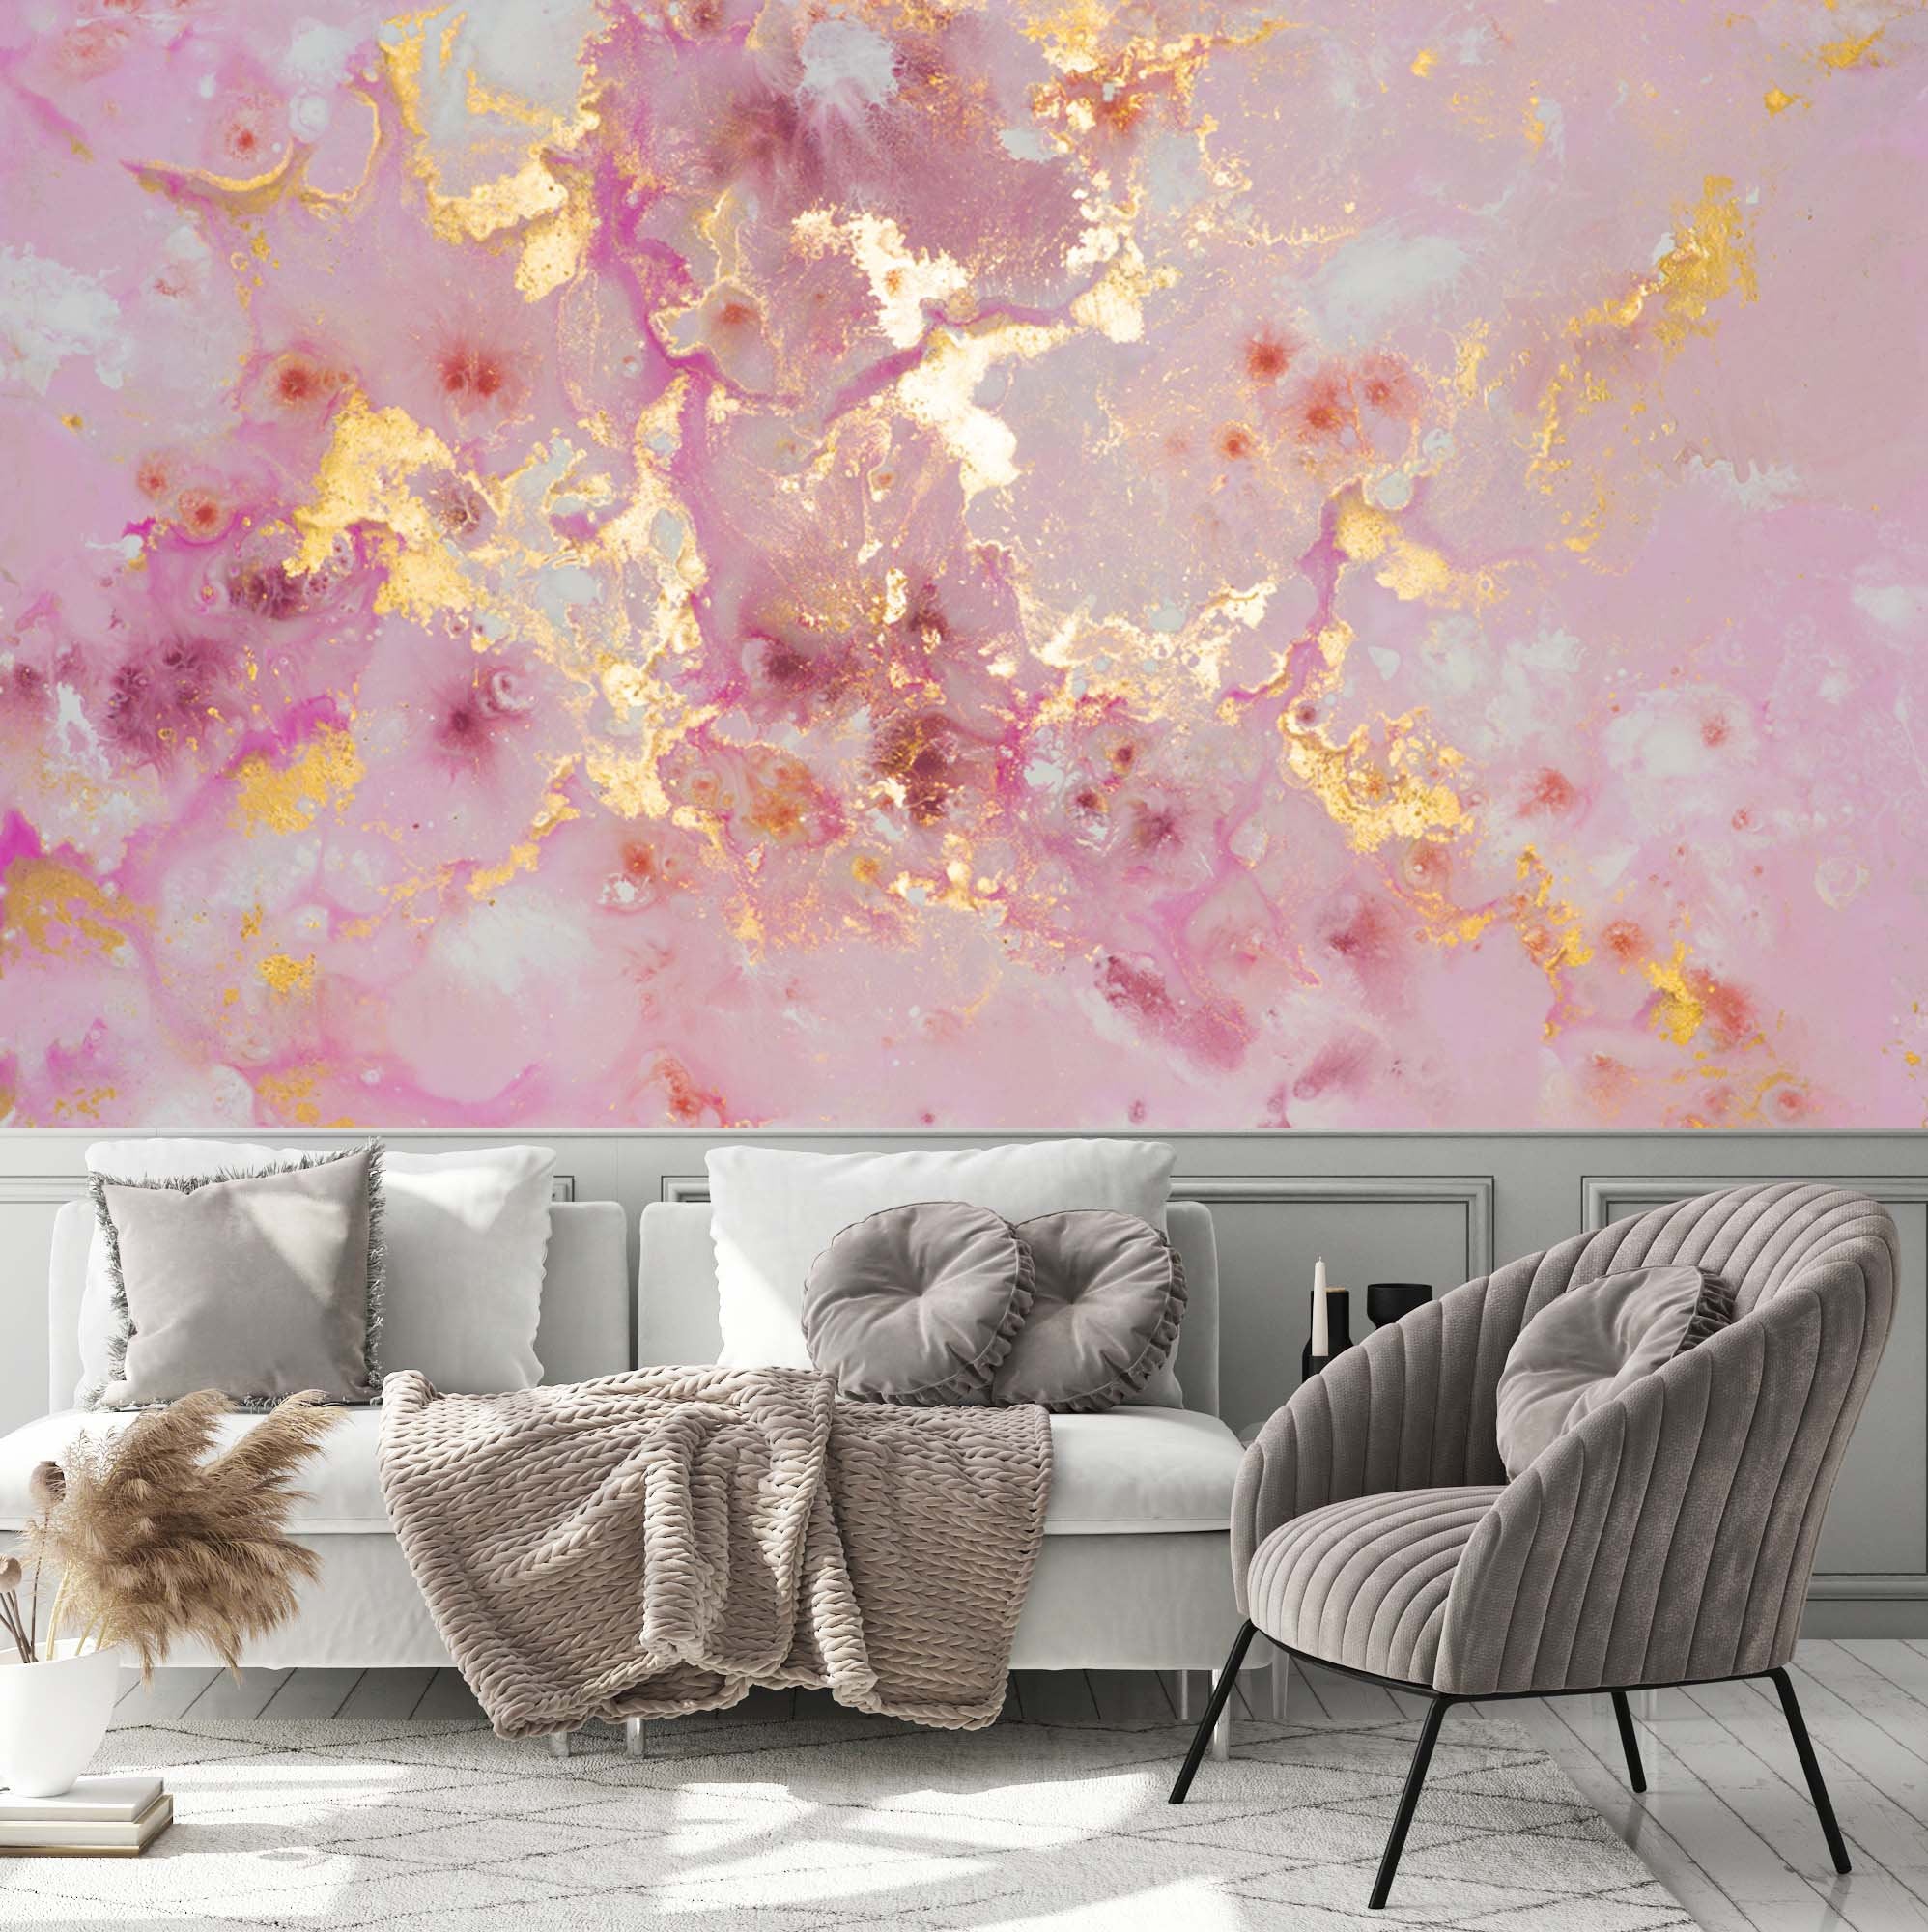 Pink Gold Abstract Painting Modern Design Background Wallpaper Cafe Restaurant Decoration Living Room Bedroom Mural Home Decor Wall Art